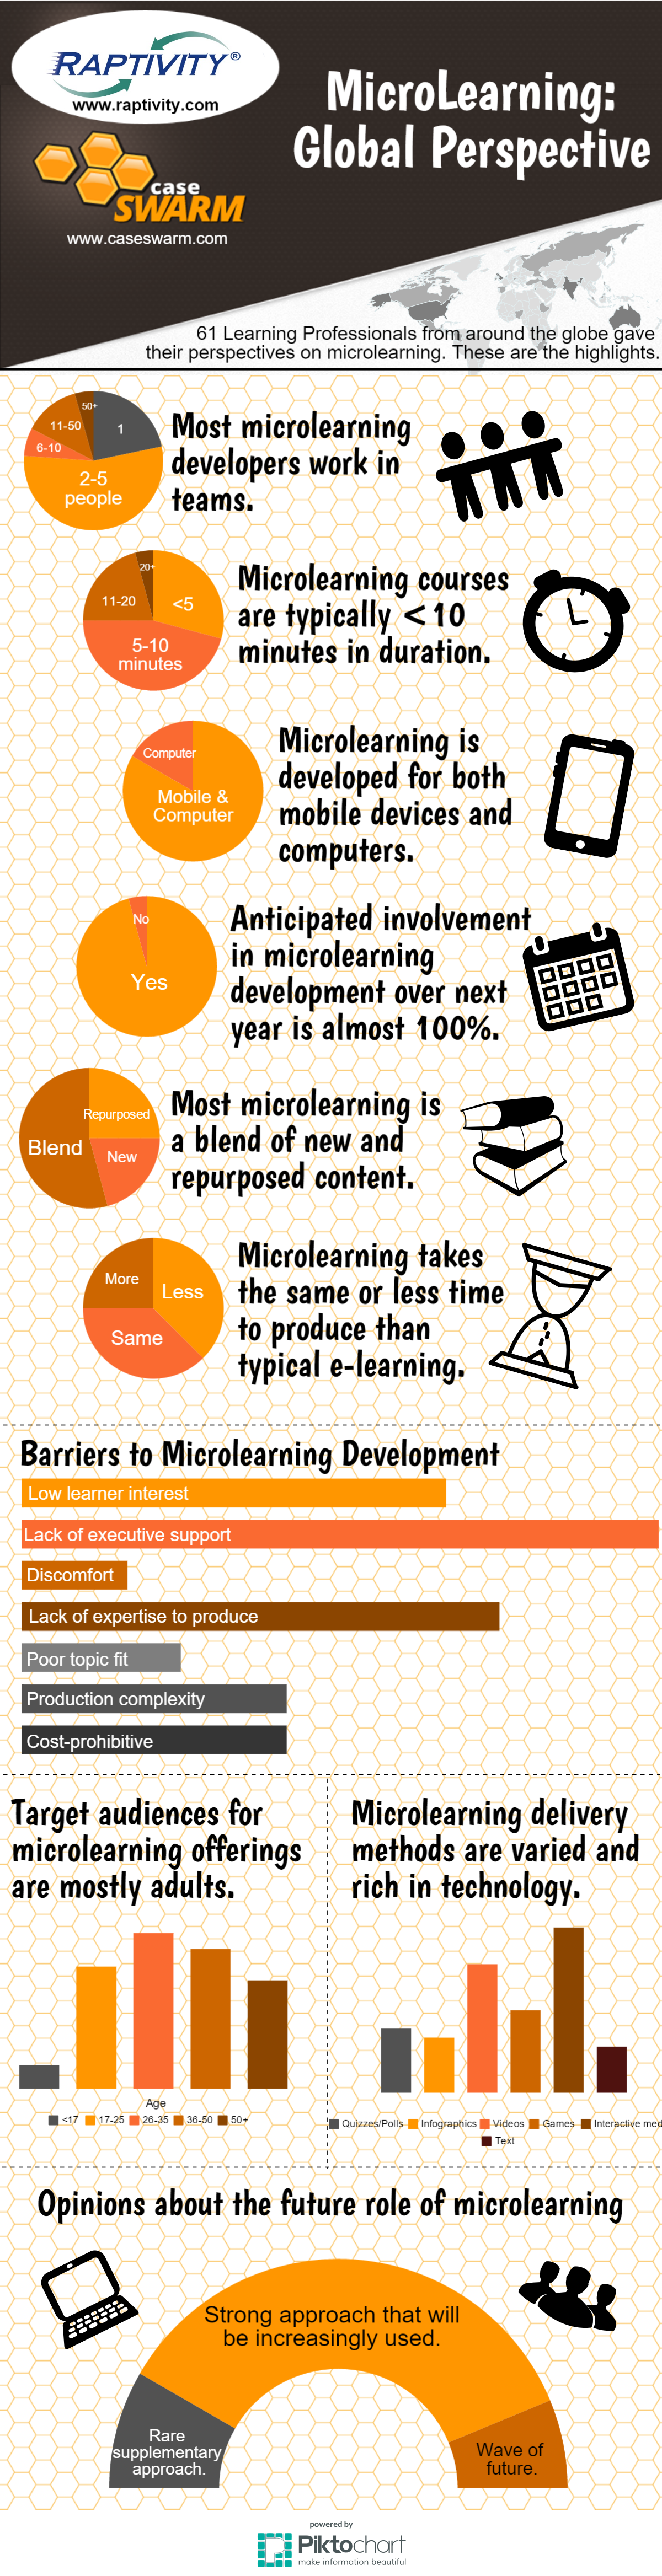 Infographic on microlearning